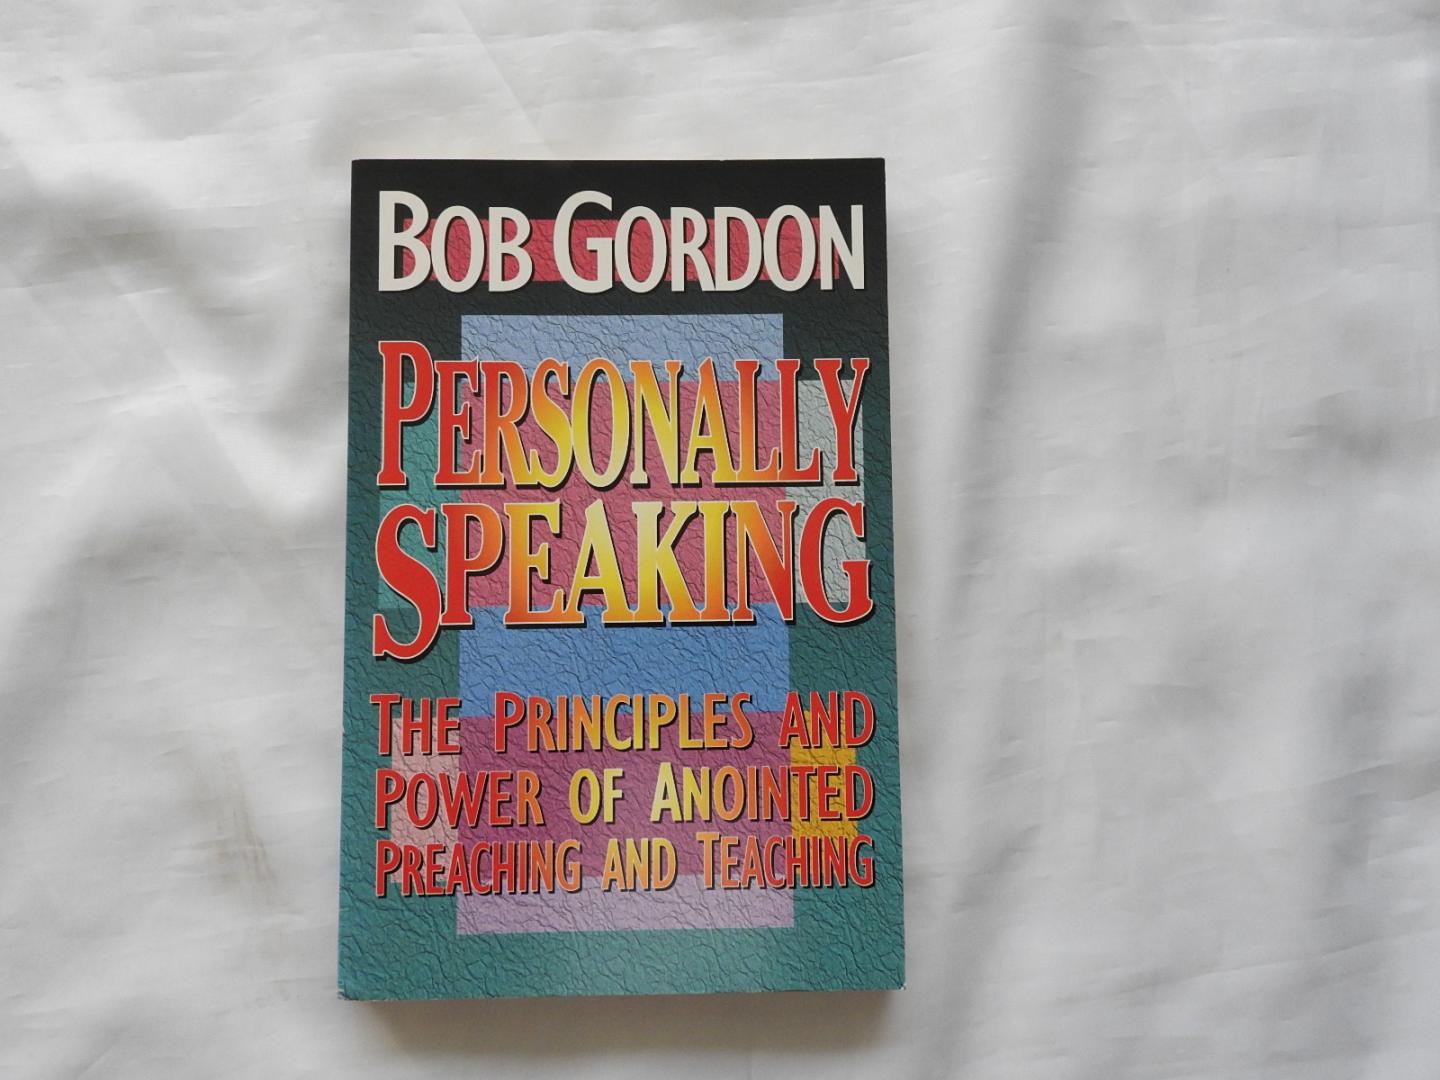 Bob Gordon - Personally speaking : the principles and power of anointed preaching and teaching